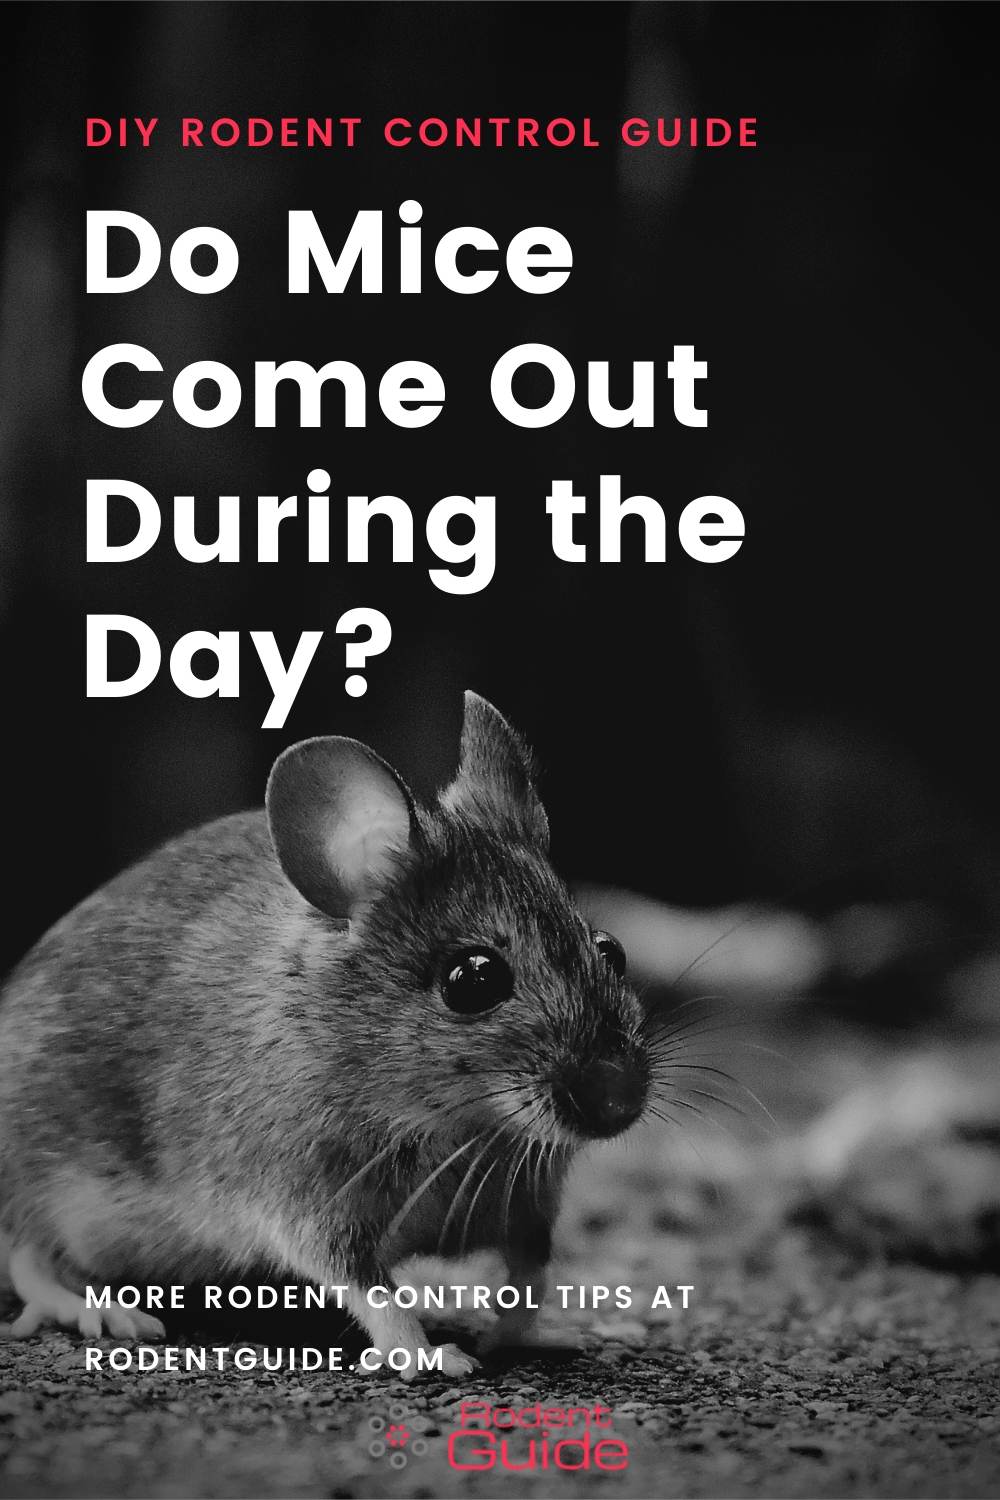 Why Do Mice Come Out During the Day